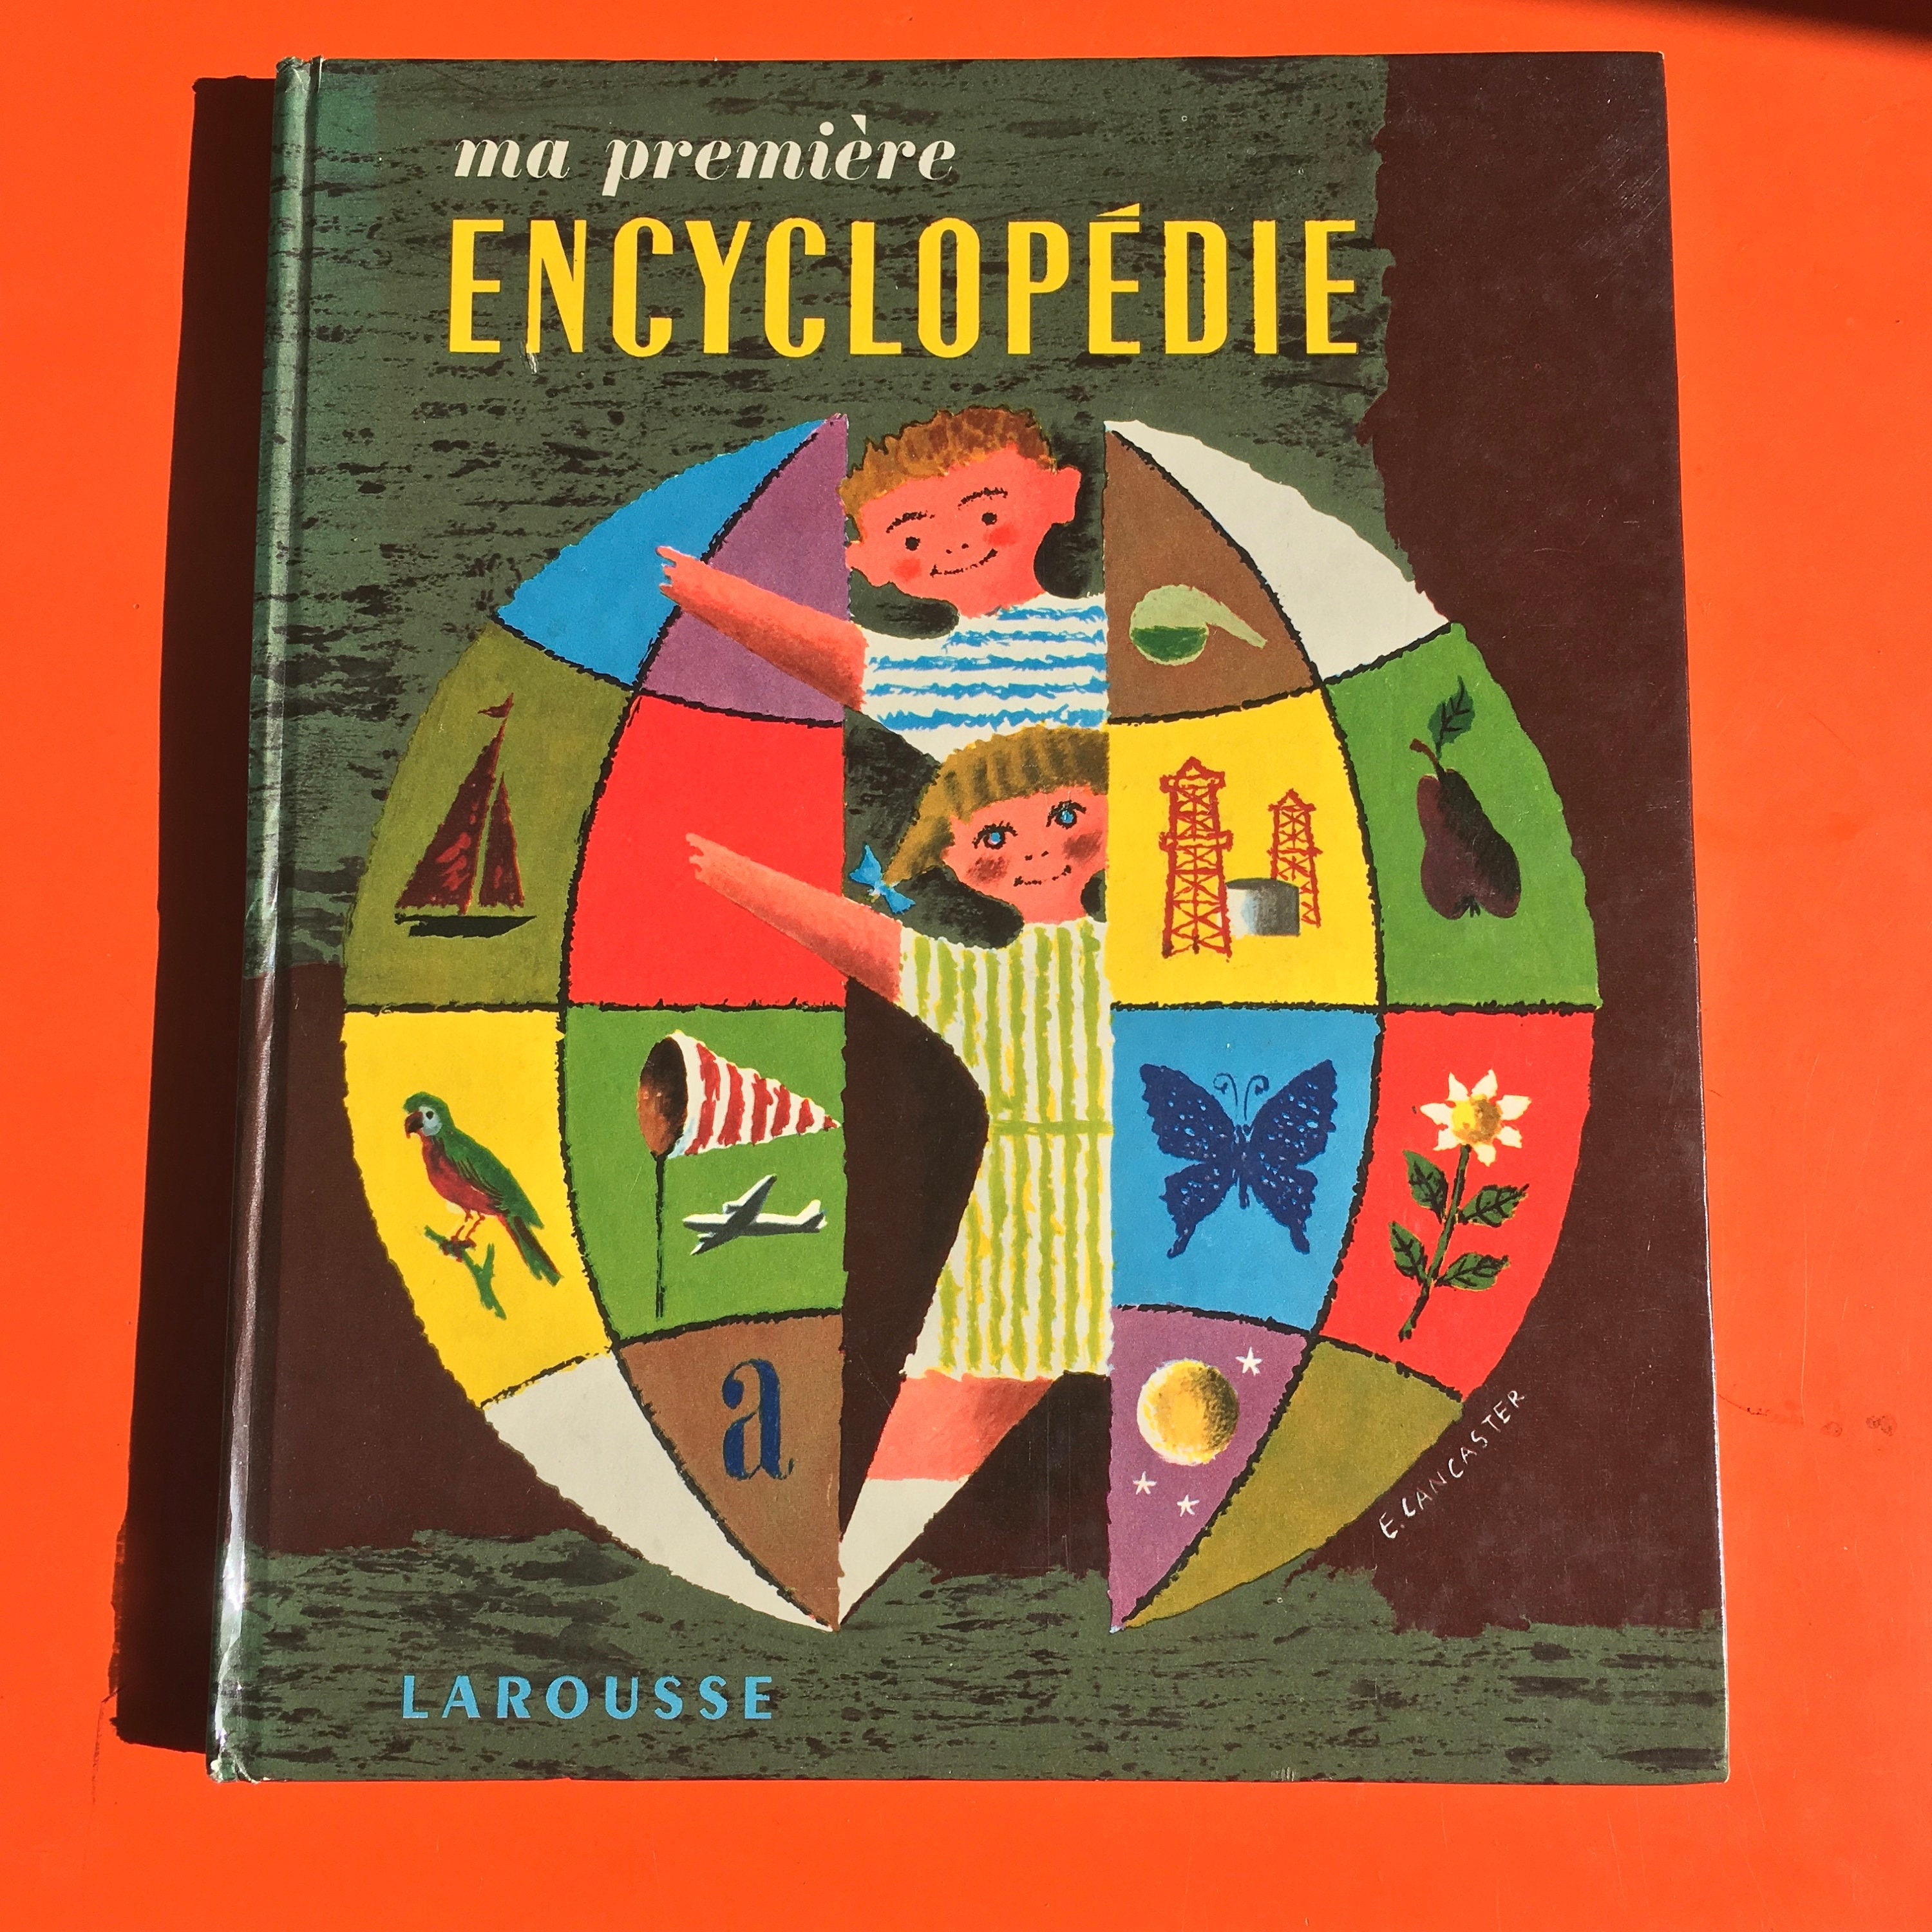 My first encyclopedia / 60s / France / Larousse Edition / | Etsy